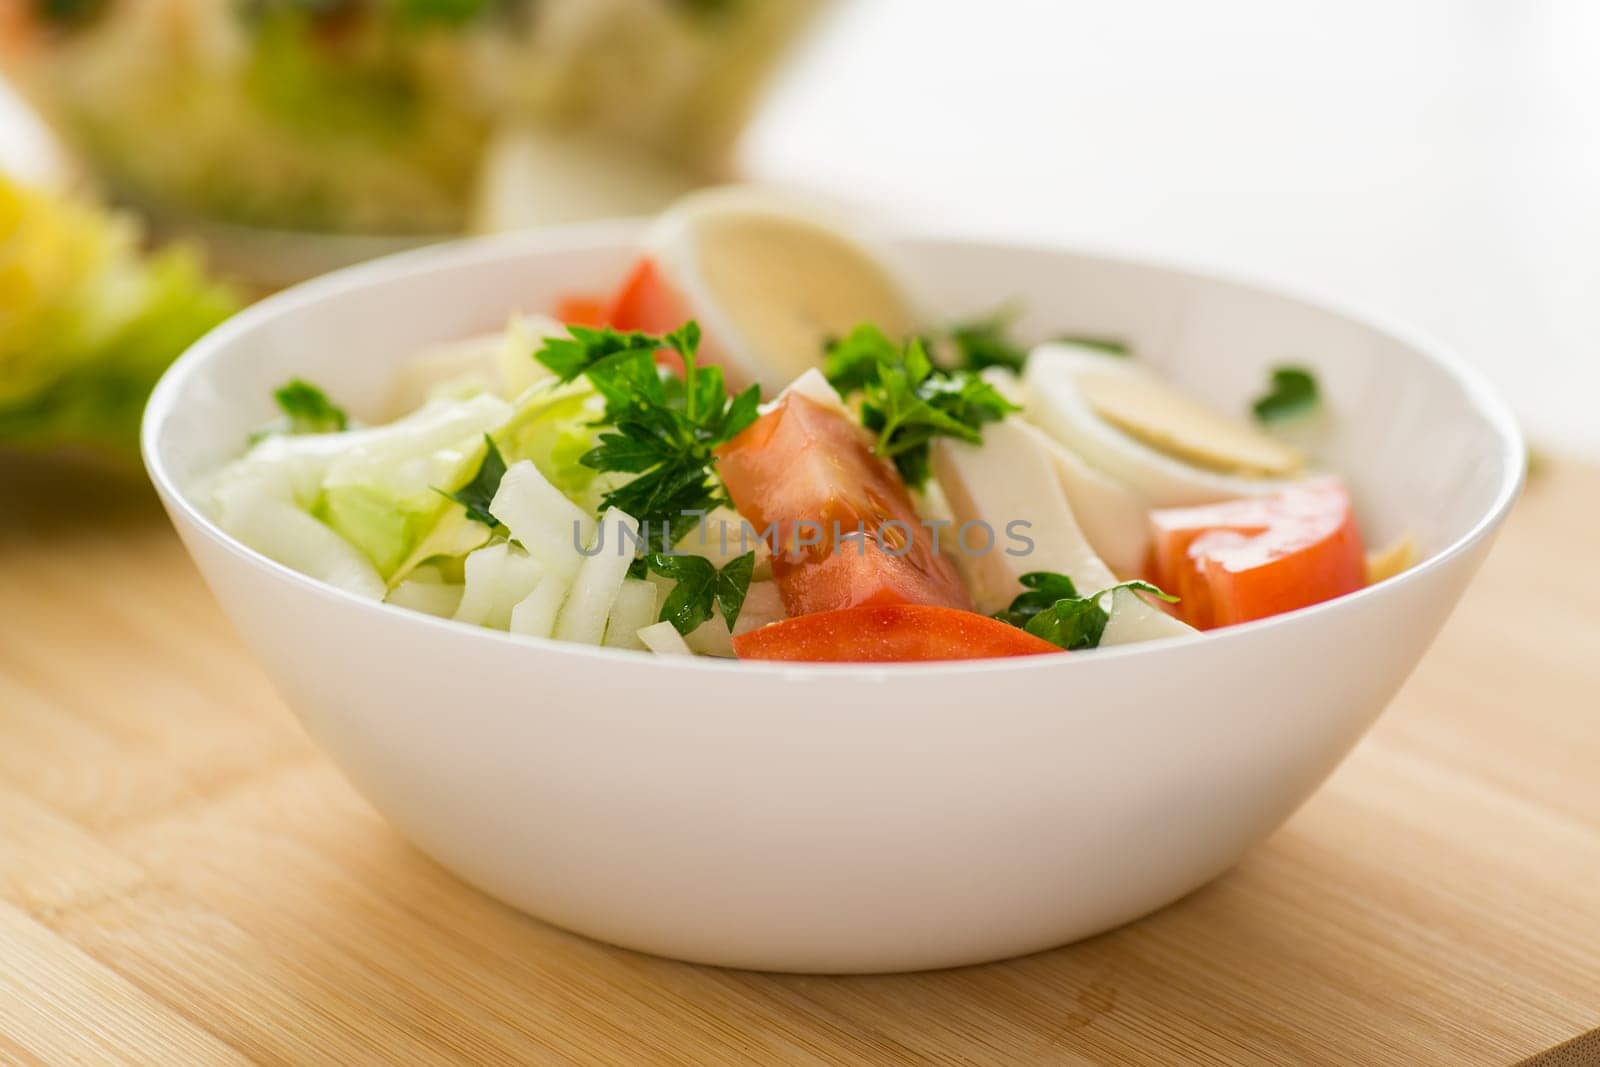 fresh vegetable salad, cabbage, tomatoes in a bowl on a wooden table .